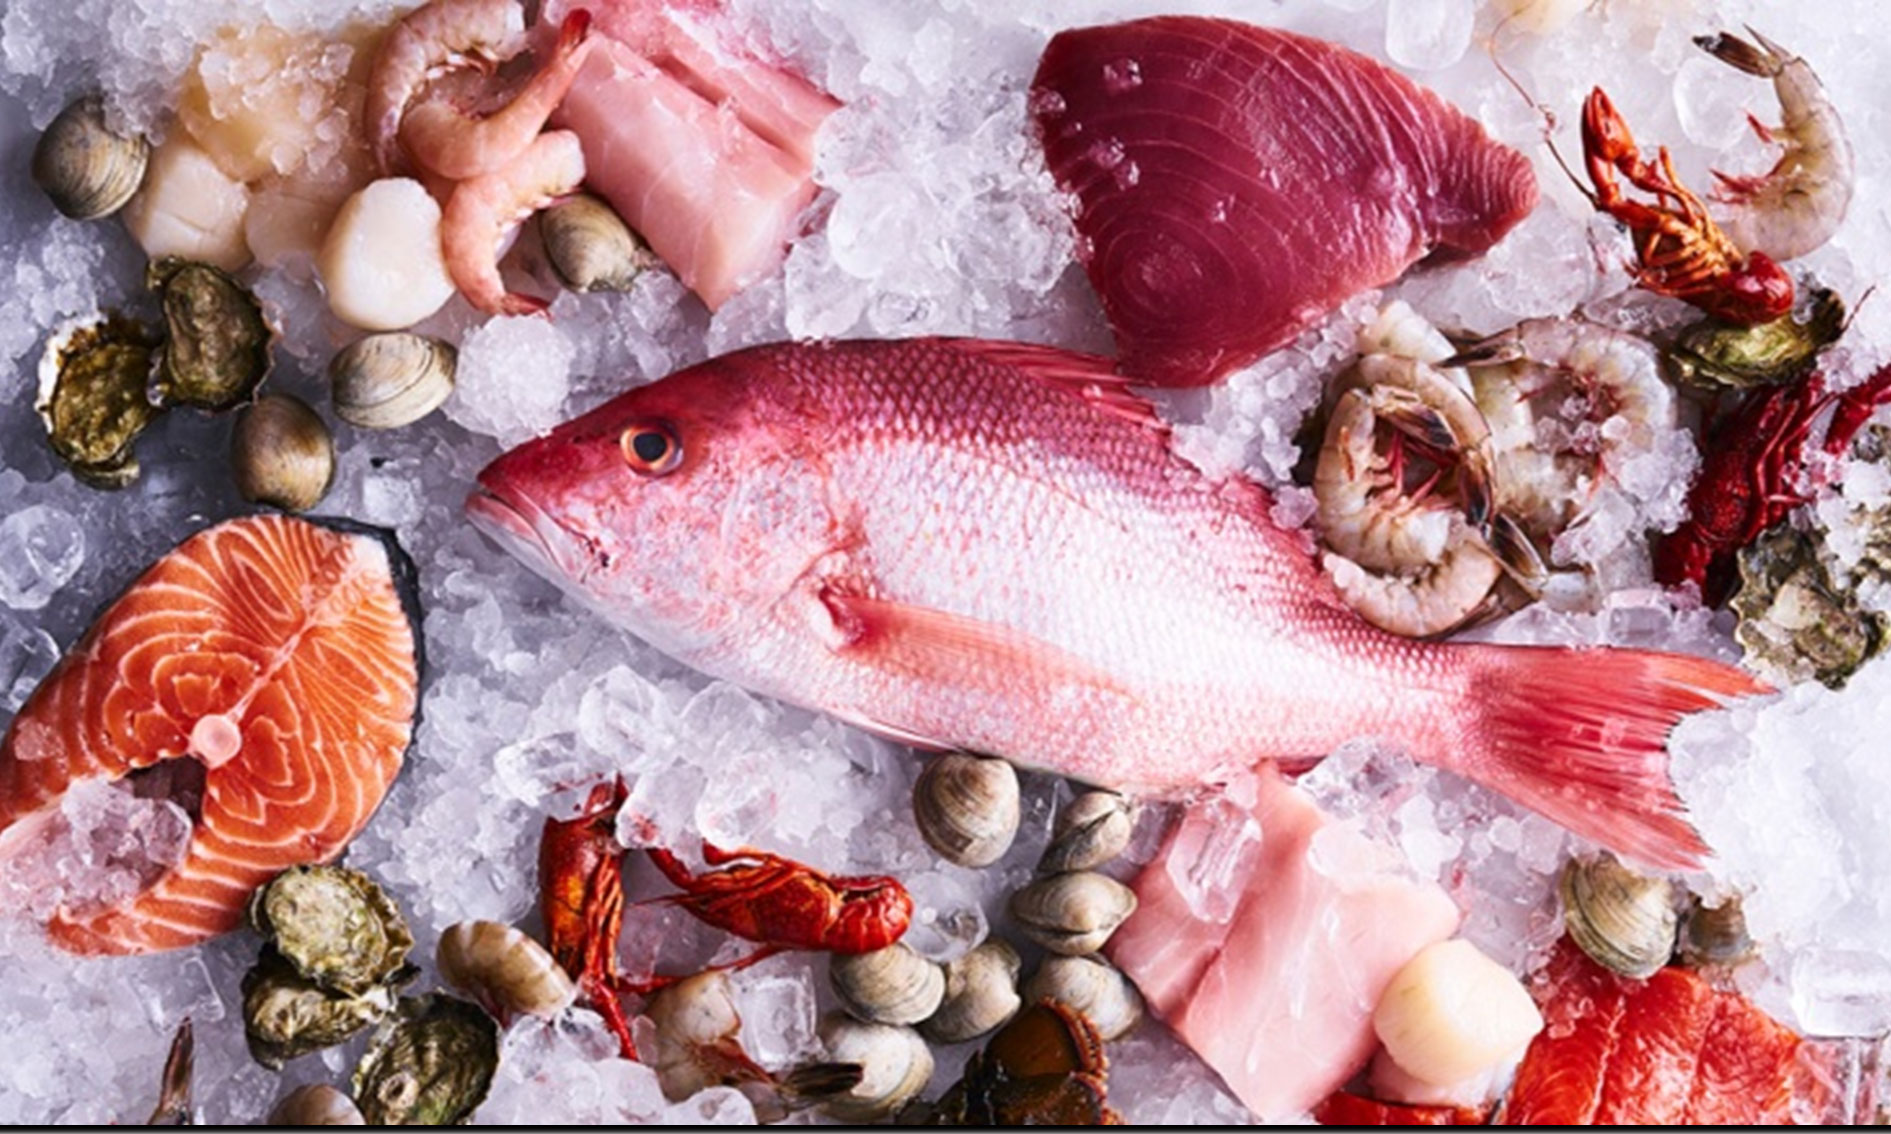 We help the seafood industry balance the needs of their businesses and communities with that of the market and government in order to build sustainable food sources, economies, and ecosystems.